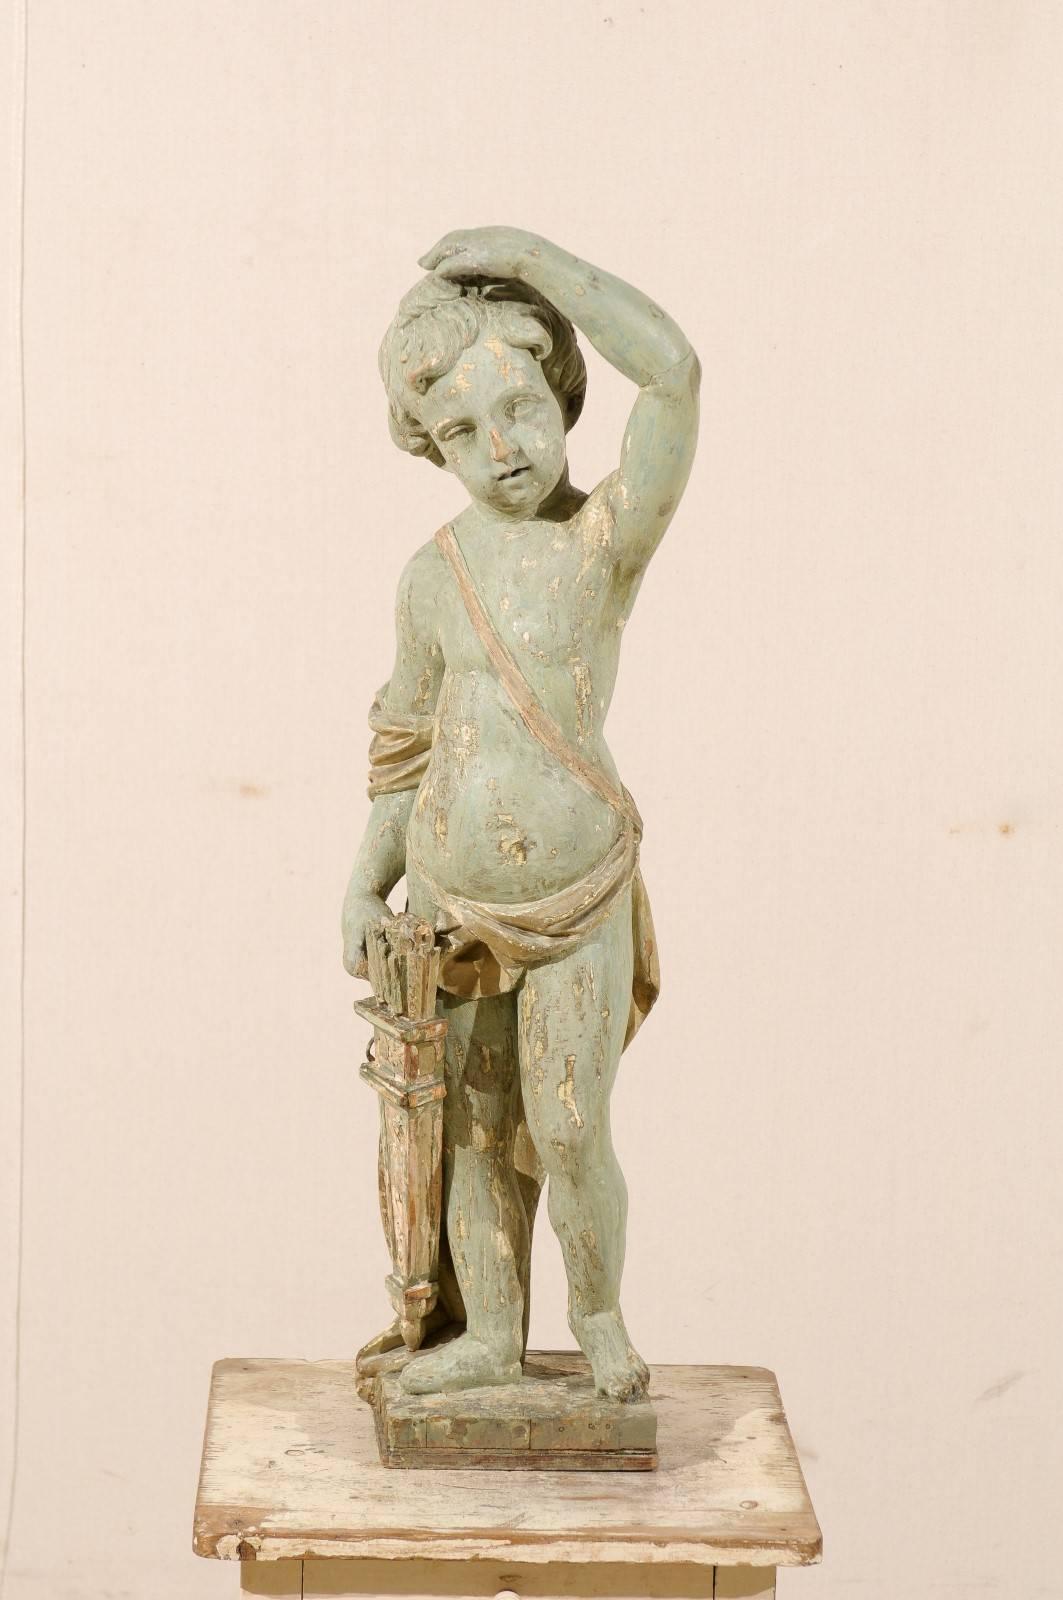 An Italian early 19th century putto figure on wooden stand. This Italian carved and painted wood statue of a putto, commonly known as a Cherub, features a male child raising one hand above his head with the other resting against his quiver with